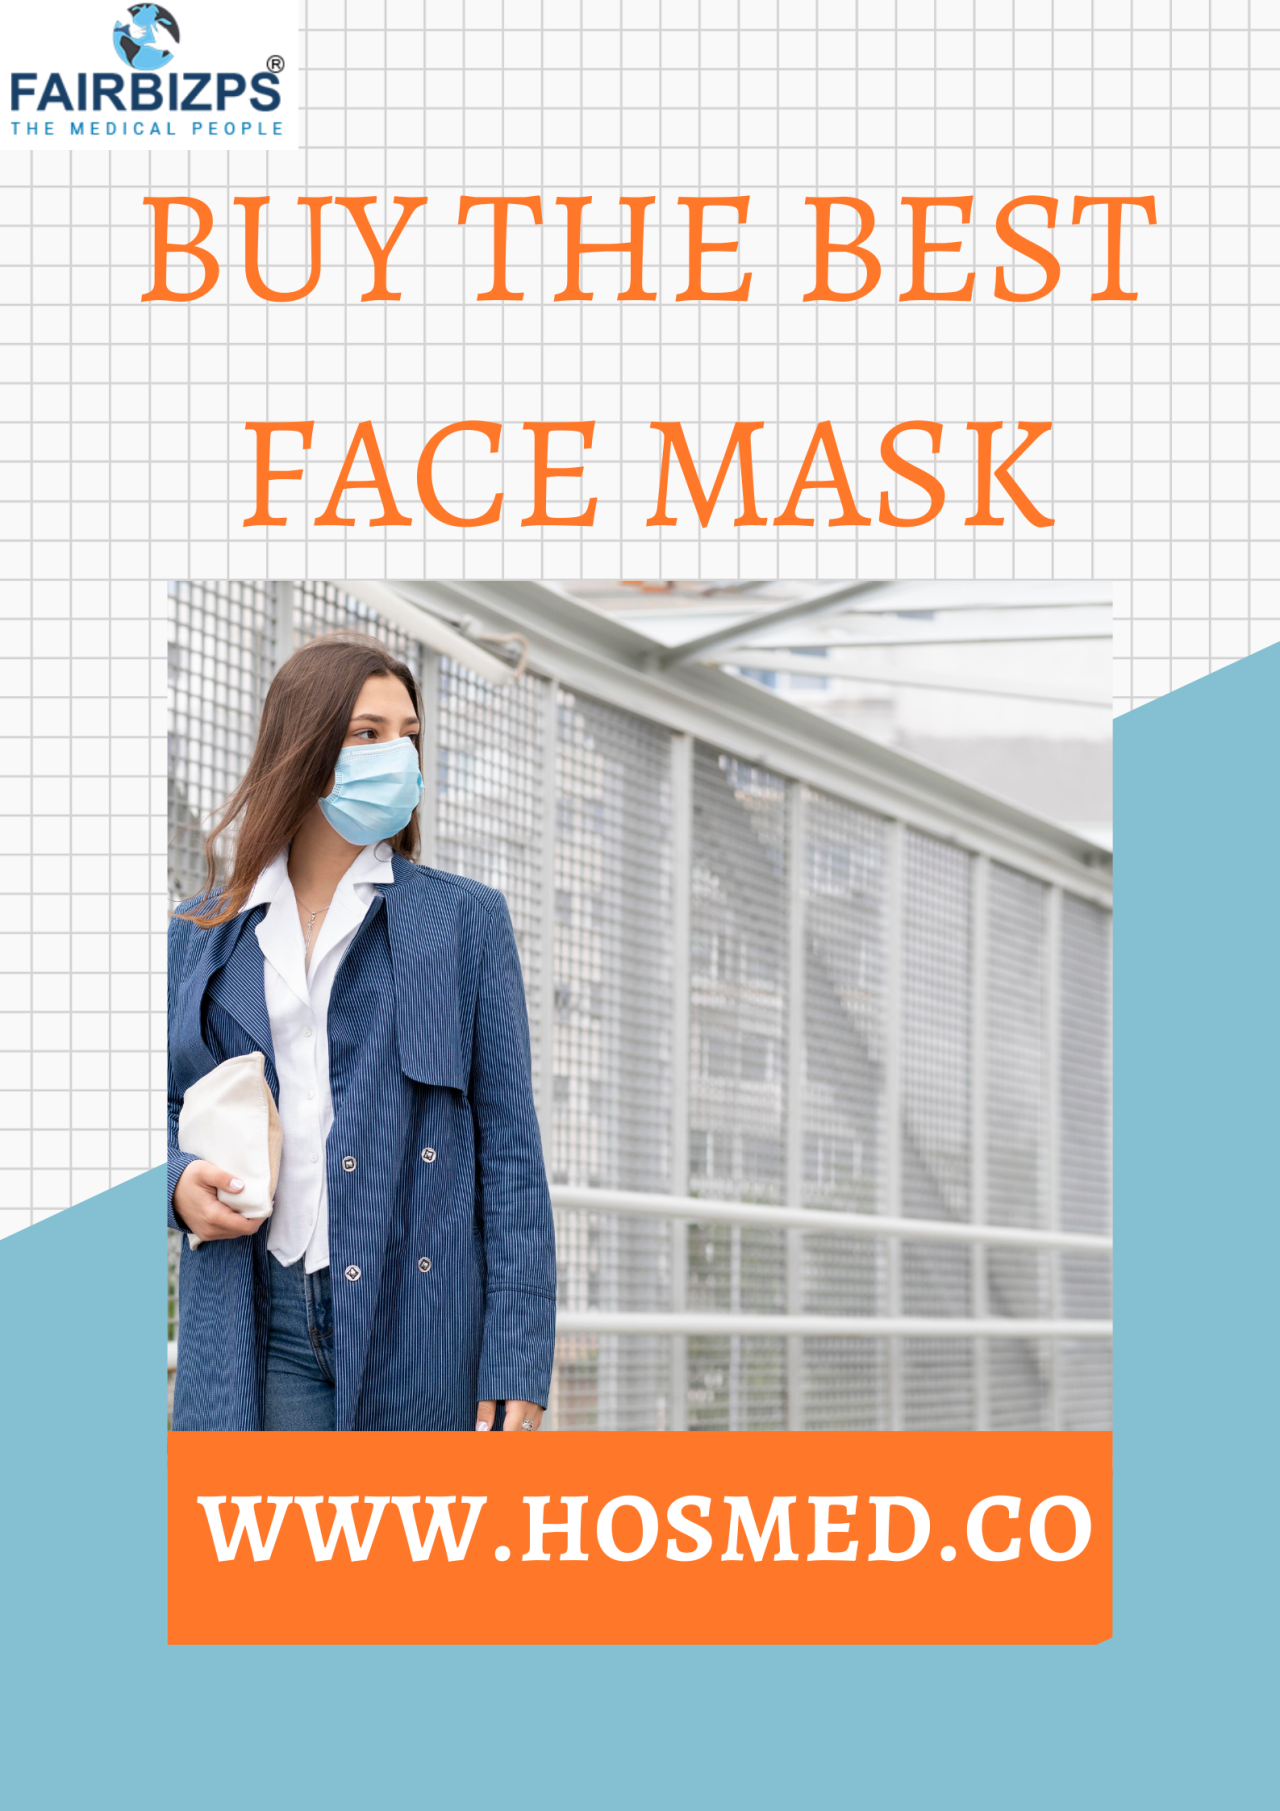 FAIRBIZPS  — Are you looking to buy the best face mask for...